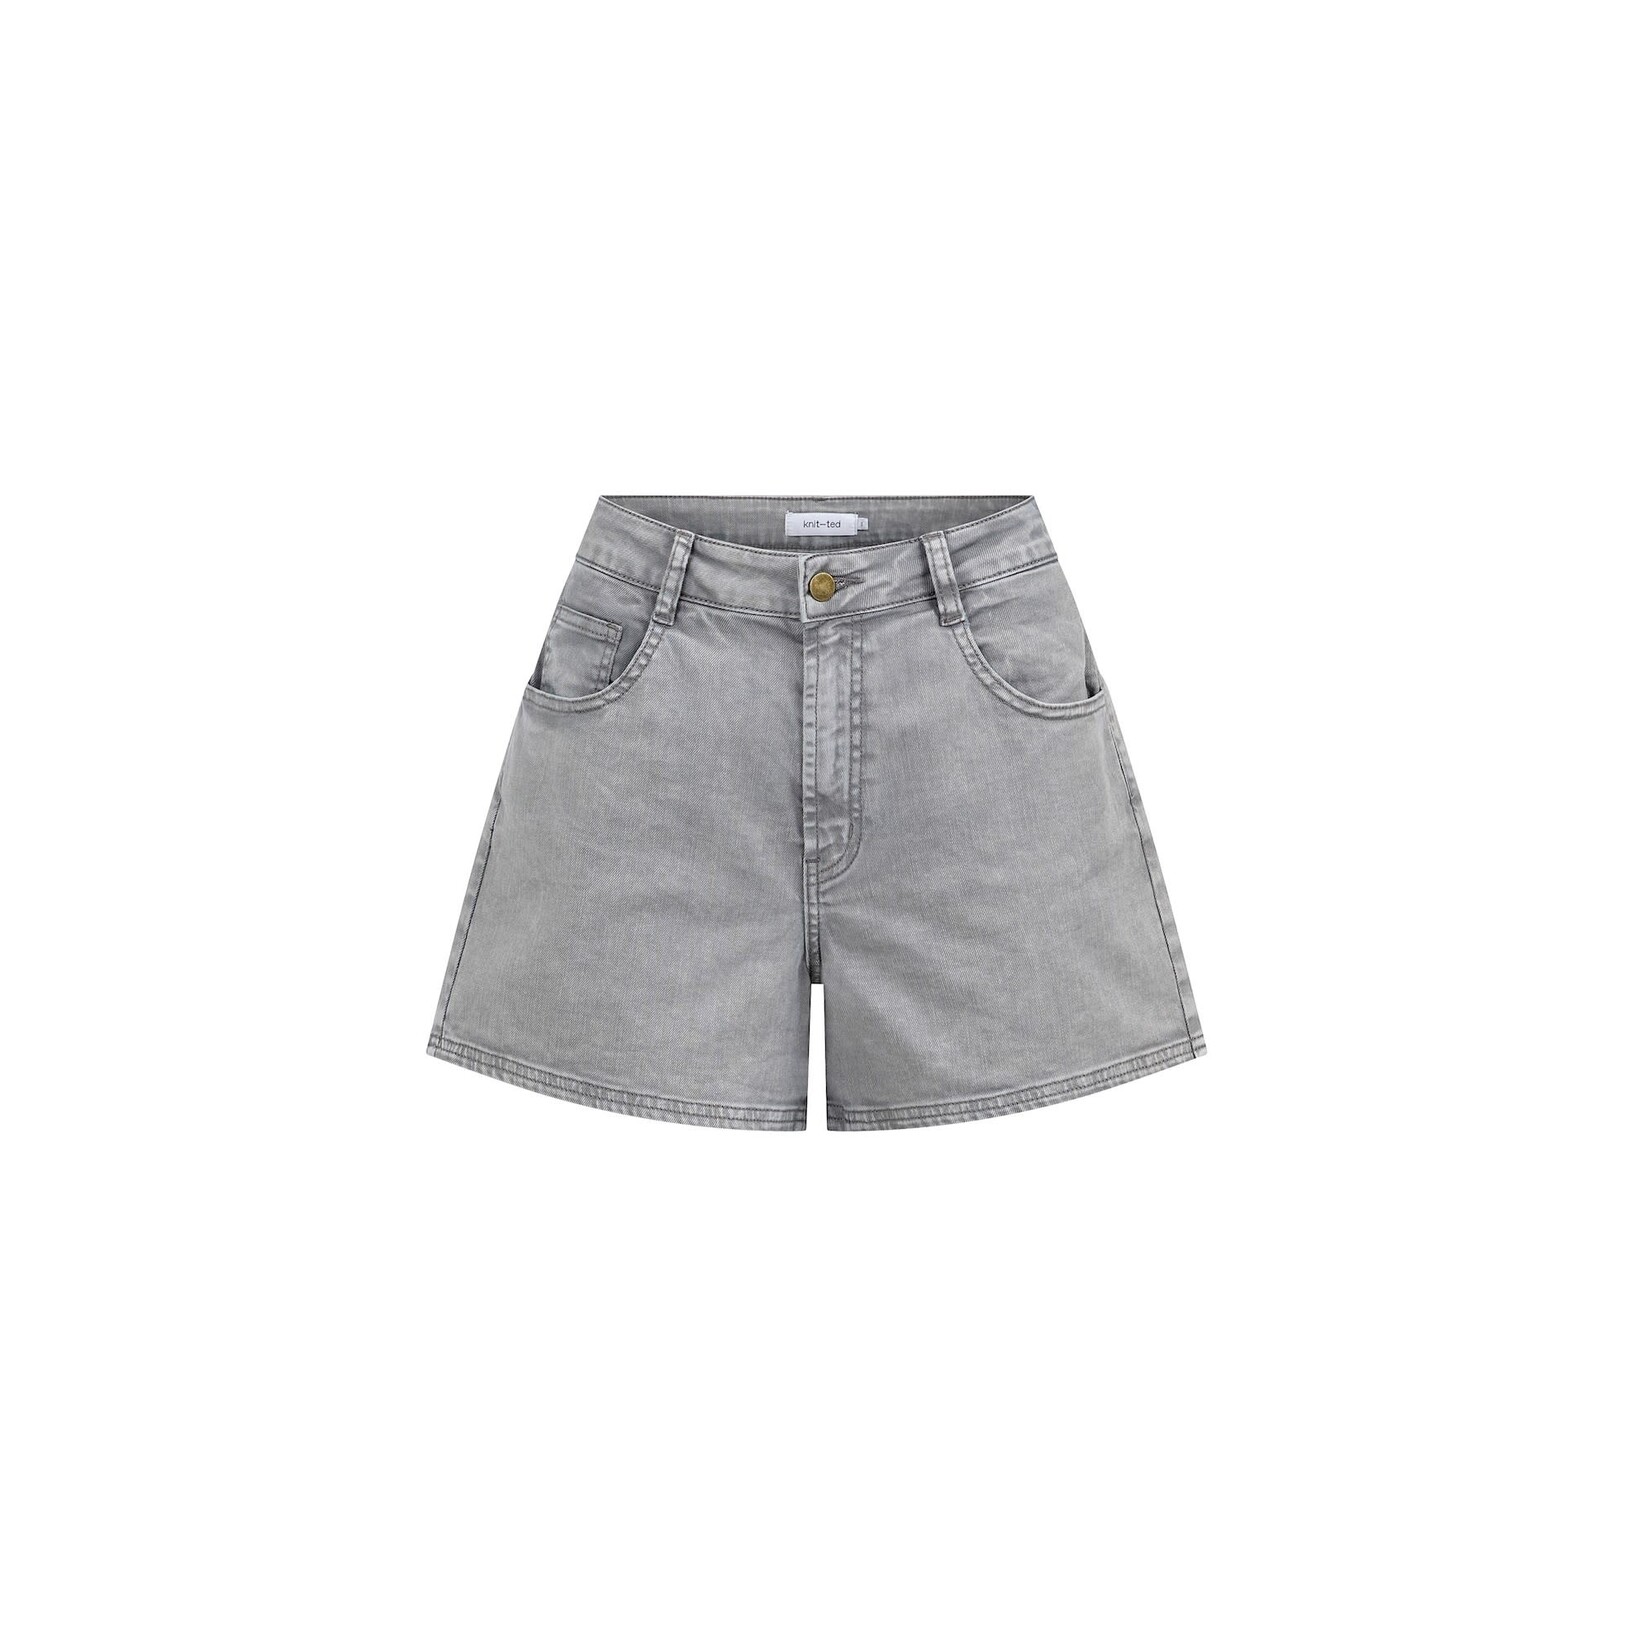 Knit-ted Darcy short Grey